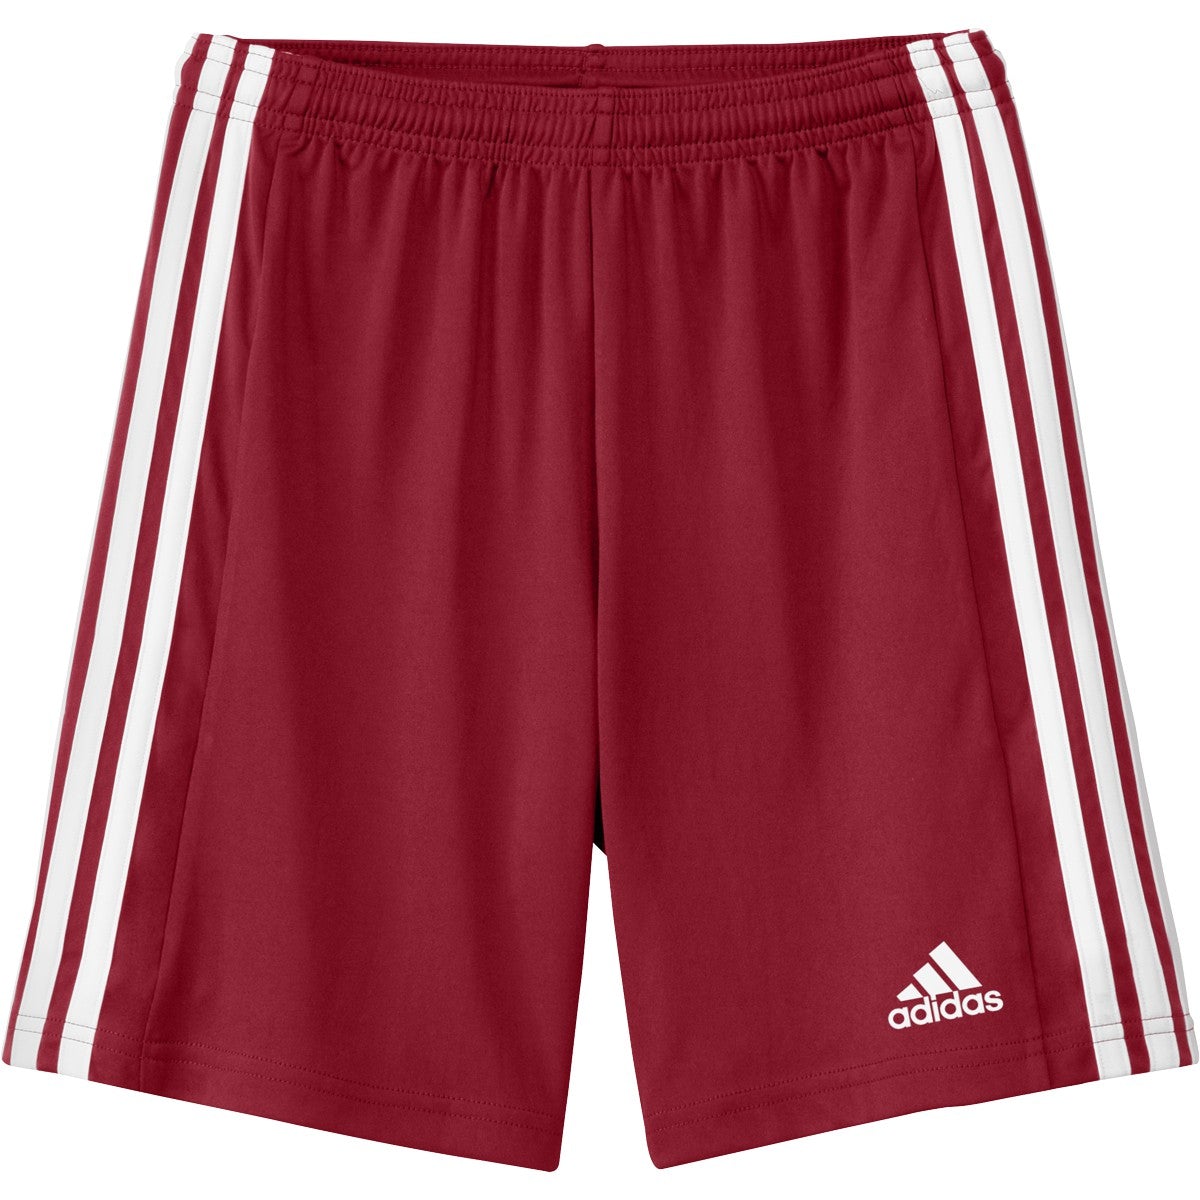 adidas Youth Squadra 21 Short | GN5761 Shorts Adidas Youth Small Red / White 